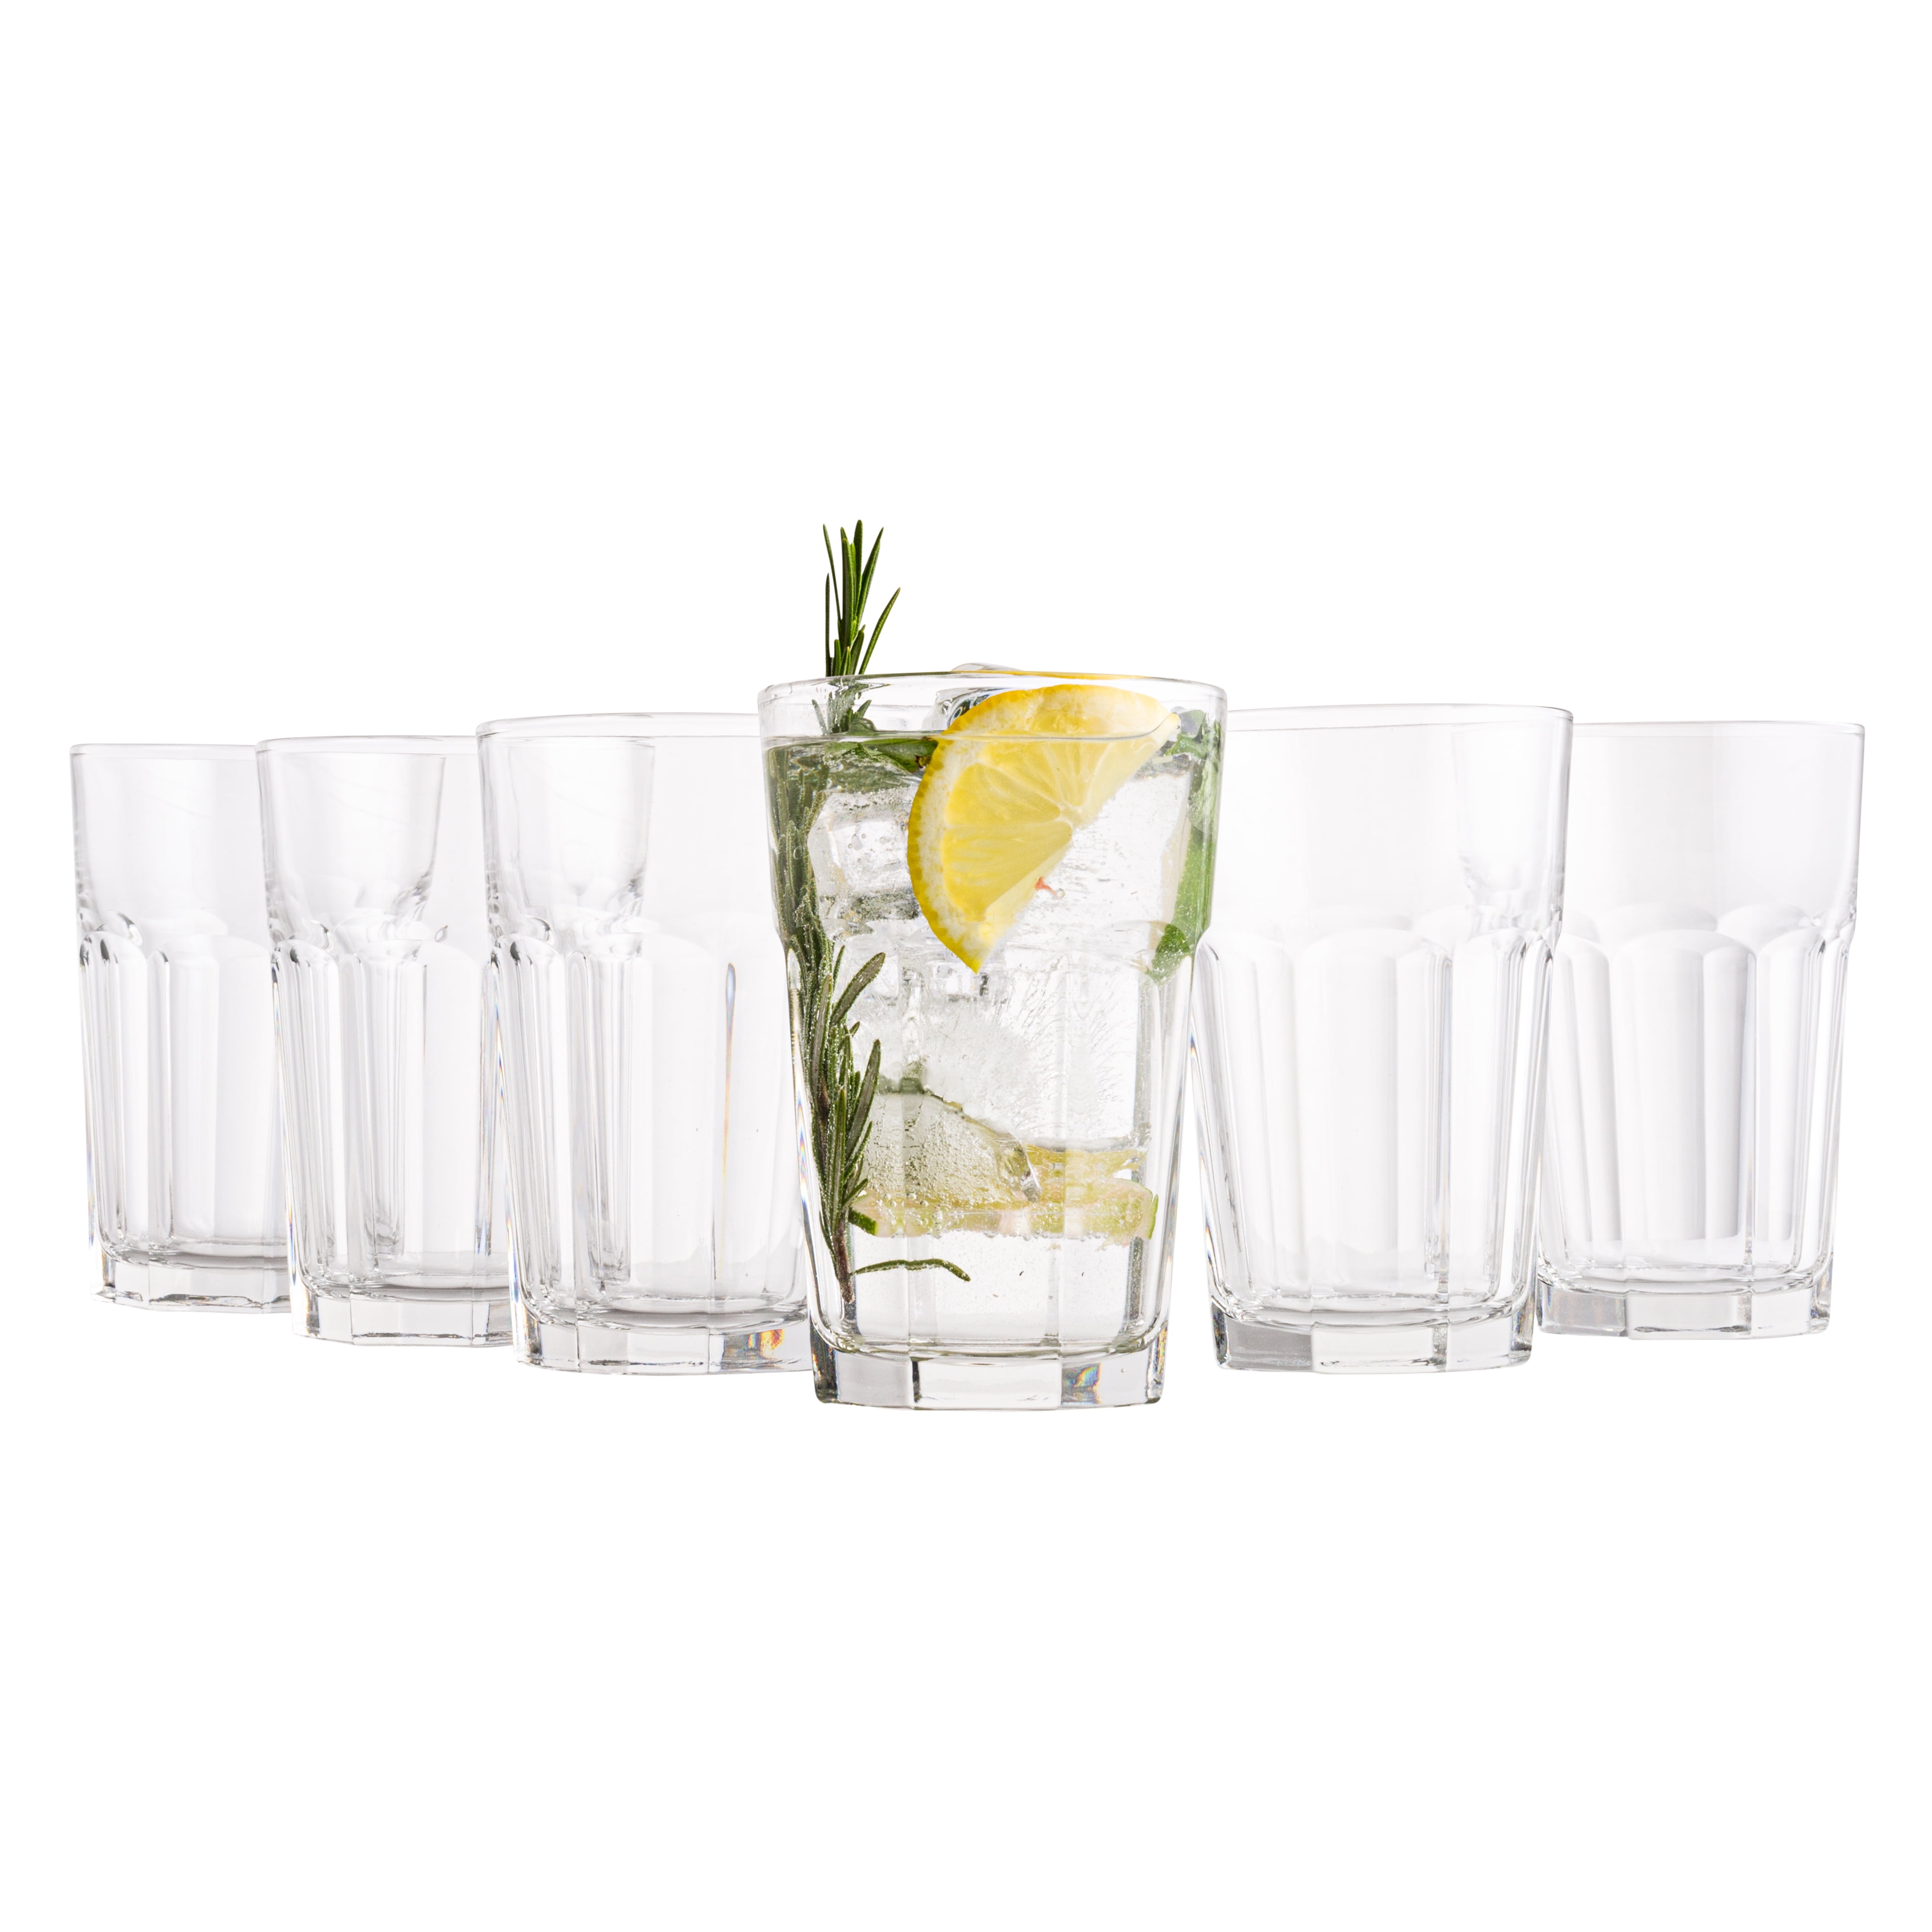 Vikko 14 Oz Drinking Glasses Thick And Durable Dishwasher Safe 6 Clear Glass Tumblers